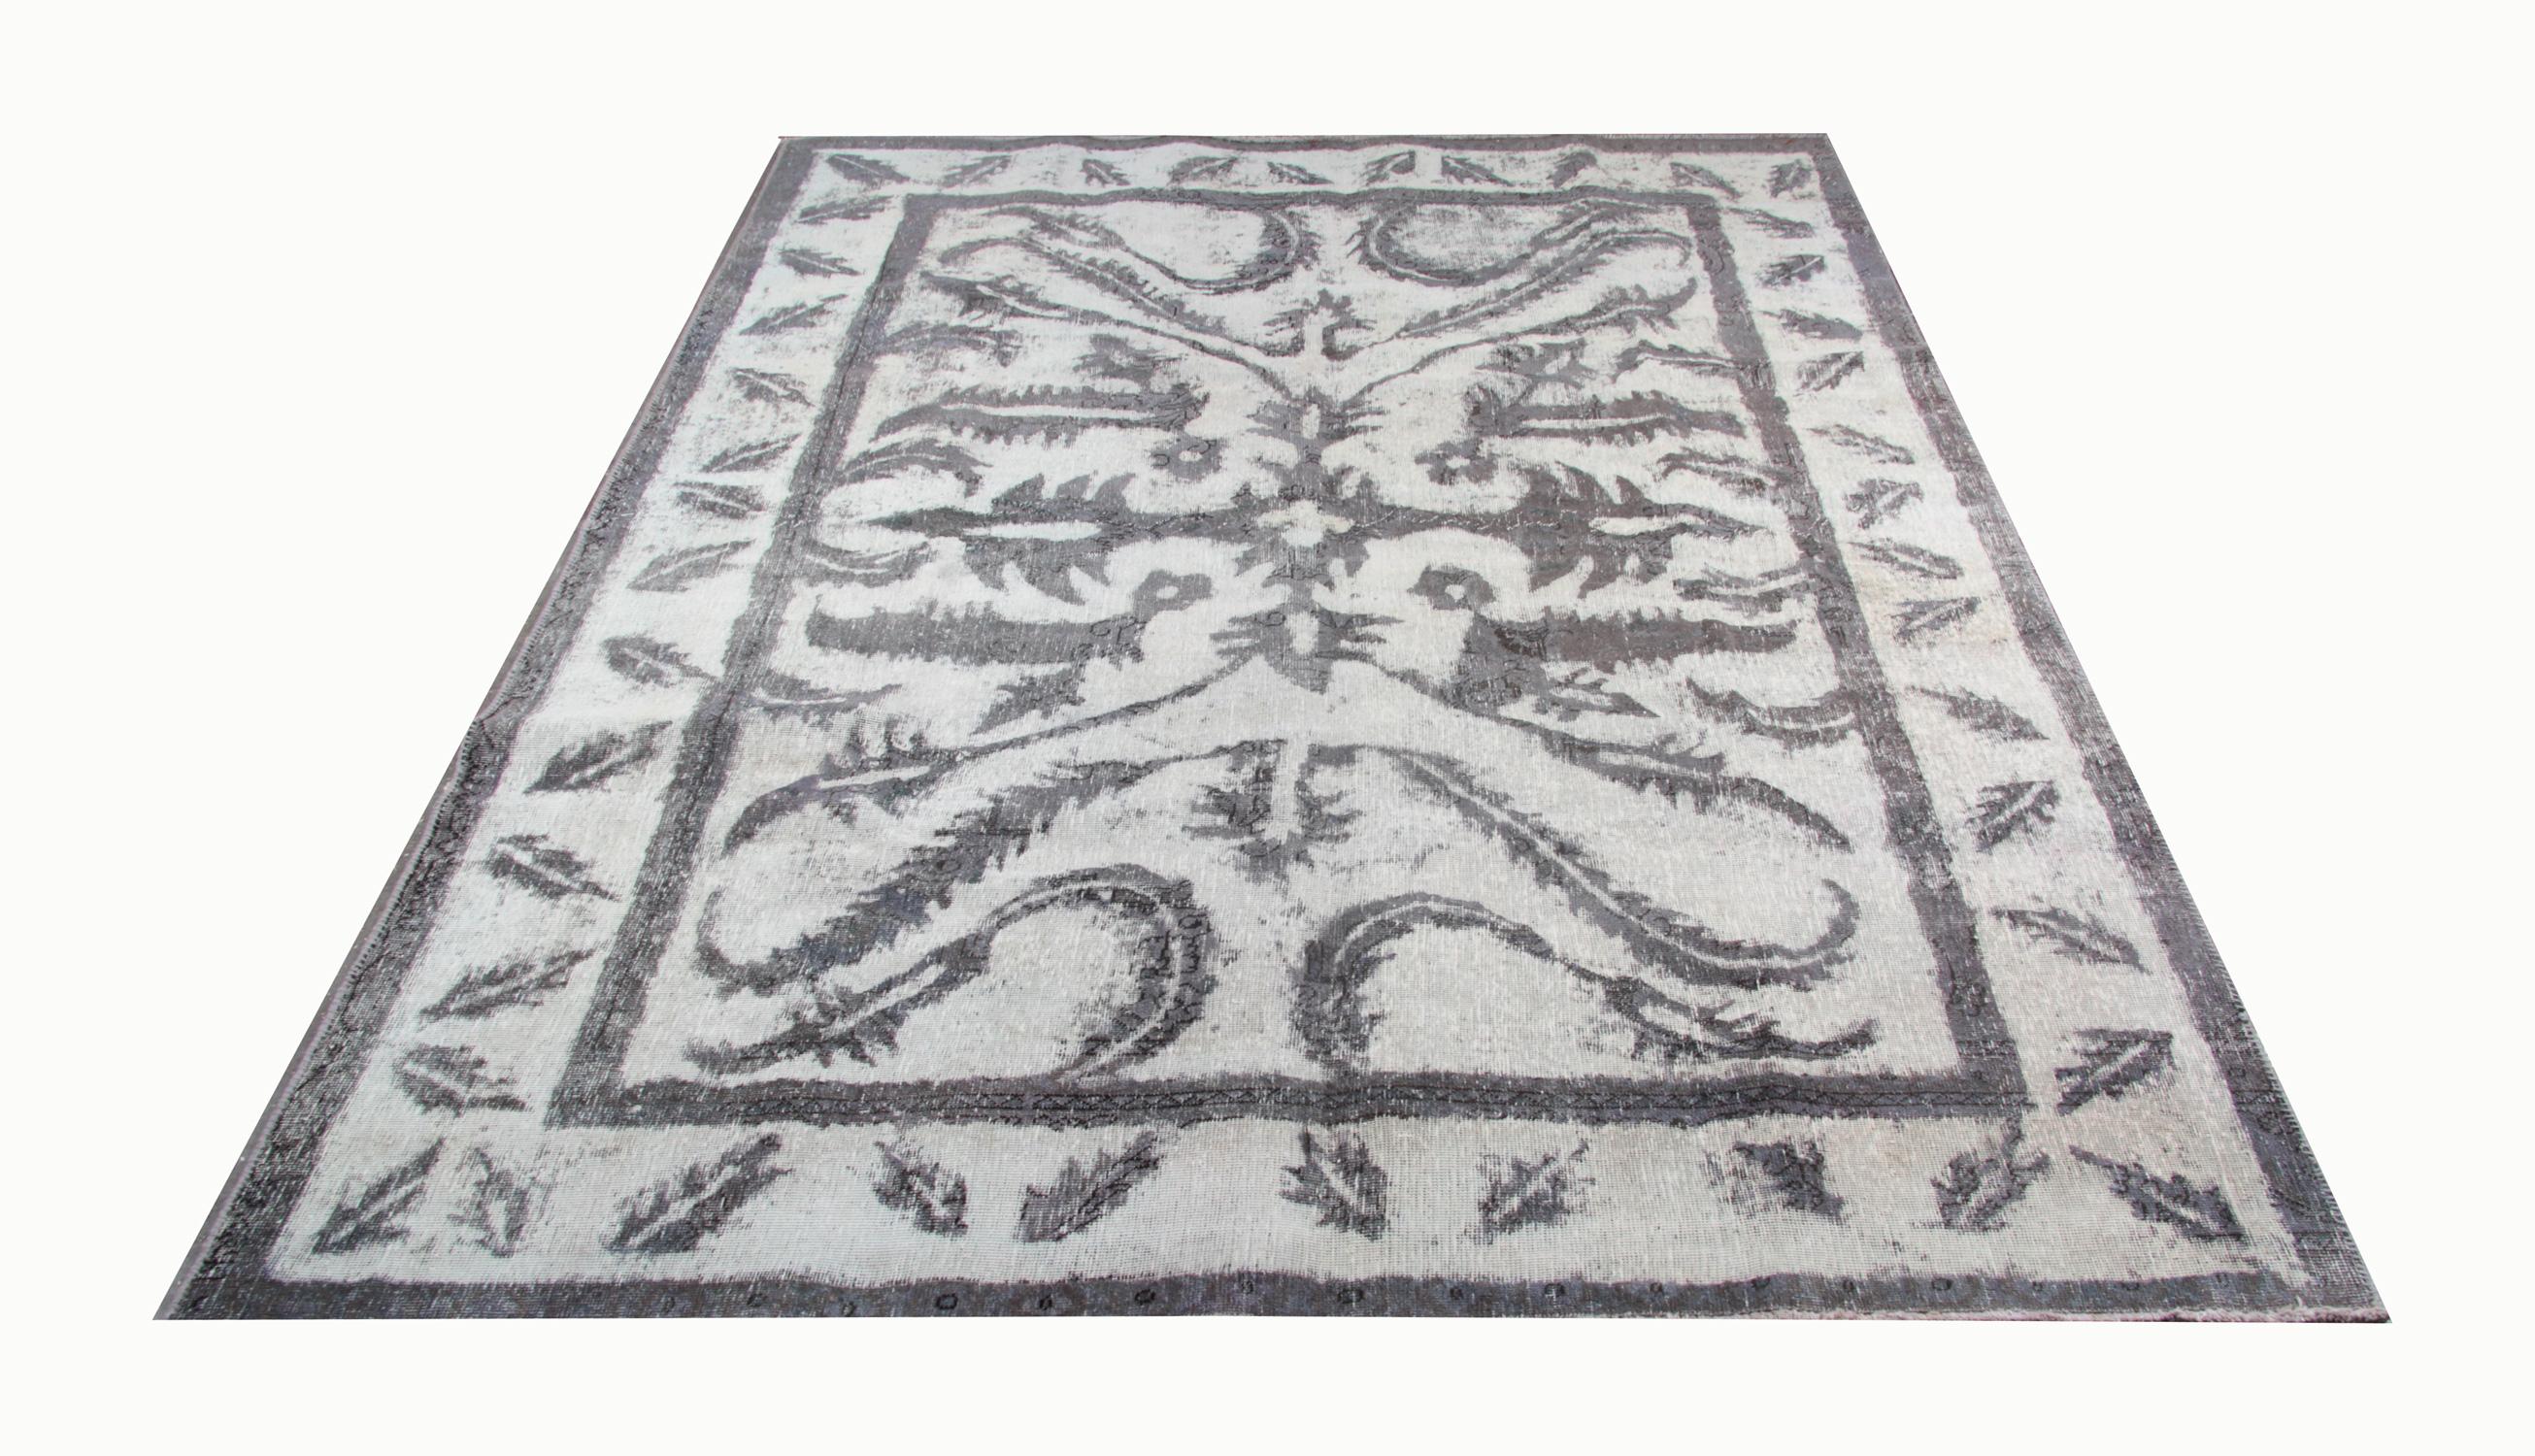 Handmade Carpet oriental overdyed rug and repainted this vintage oriental carpet is a stunning example of a vintage Turkish area rug. This predominantly grey rug also features various shades of brown, black and white, making it very easy to fit in